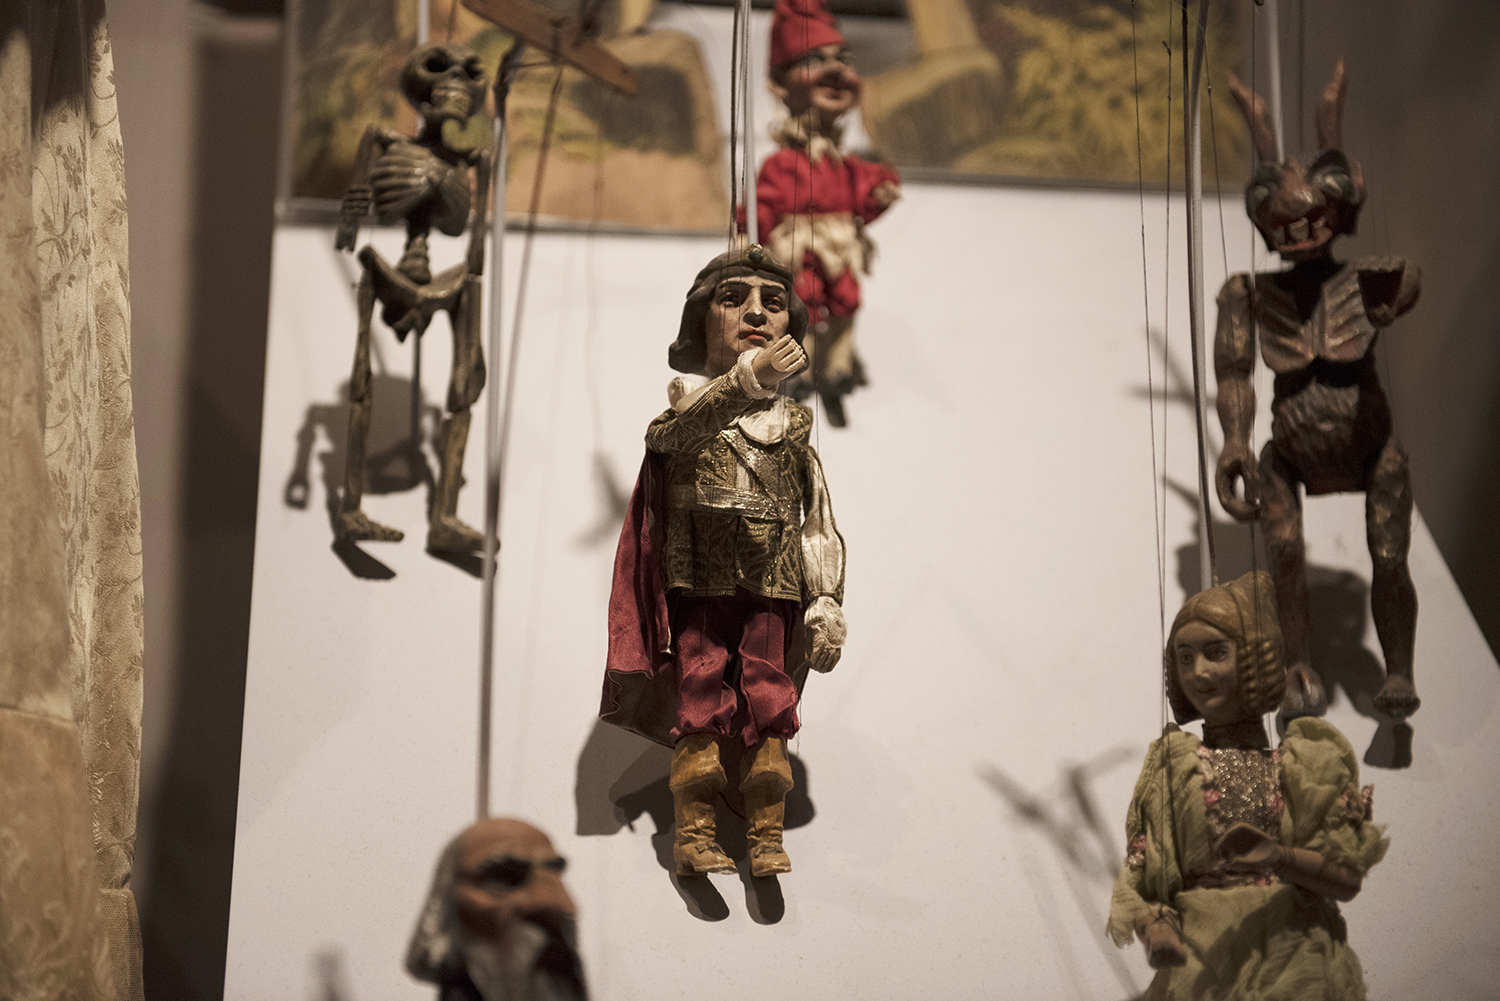 Czech Puppets, 1920s.| Special Collections Gallery at the Heinz History Center